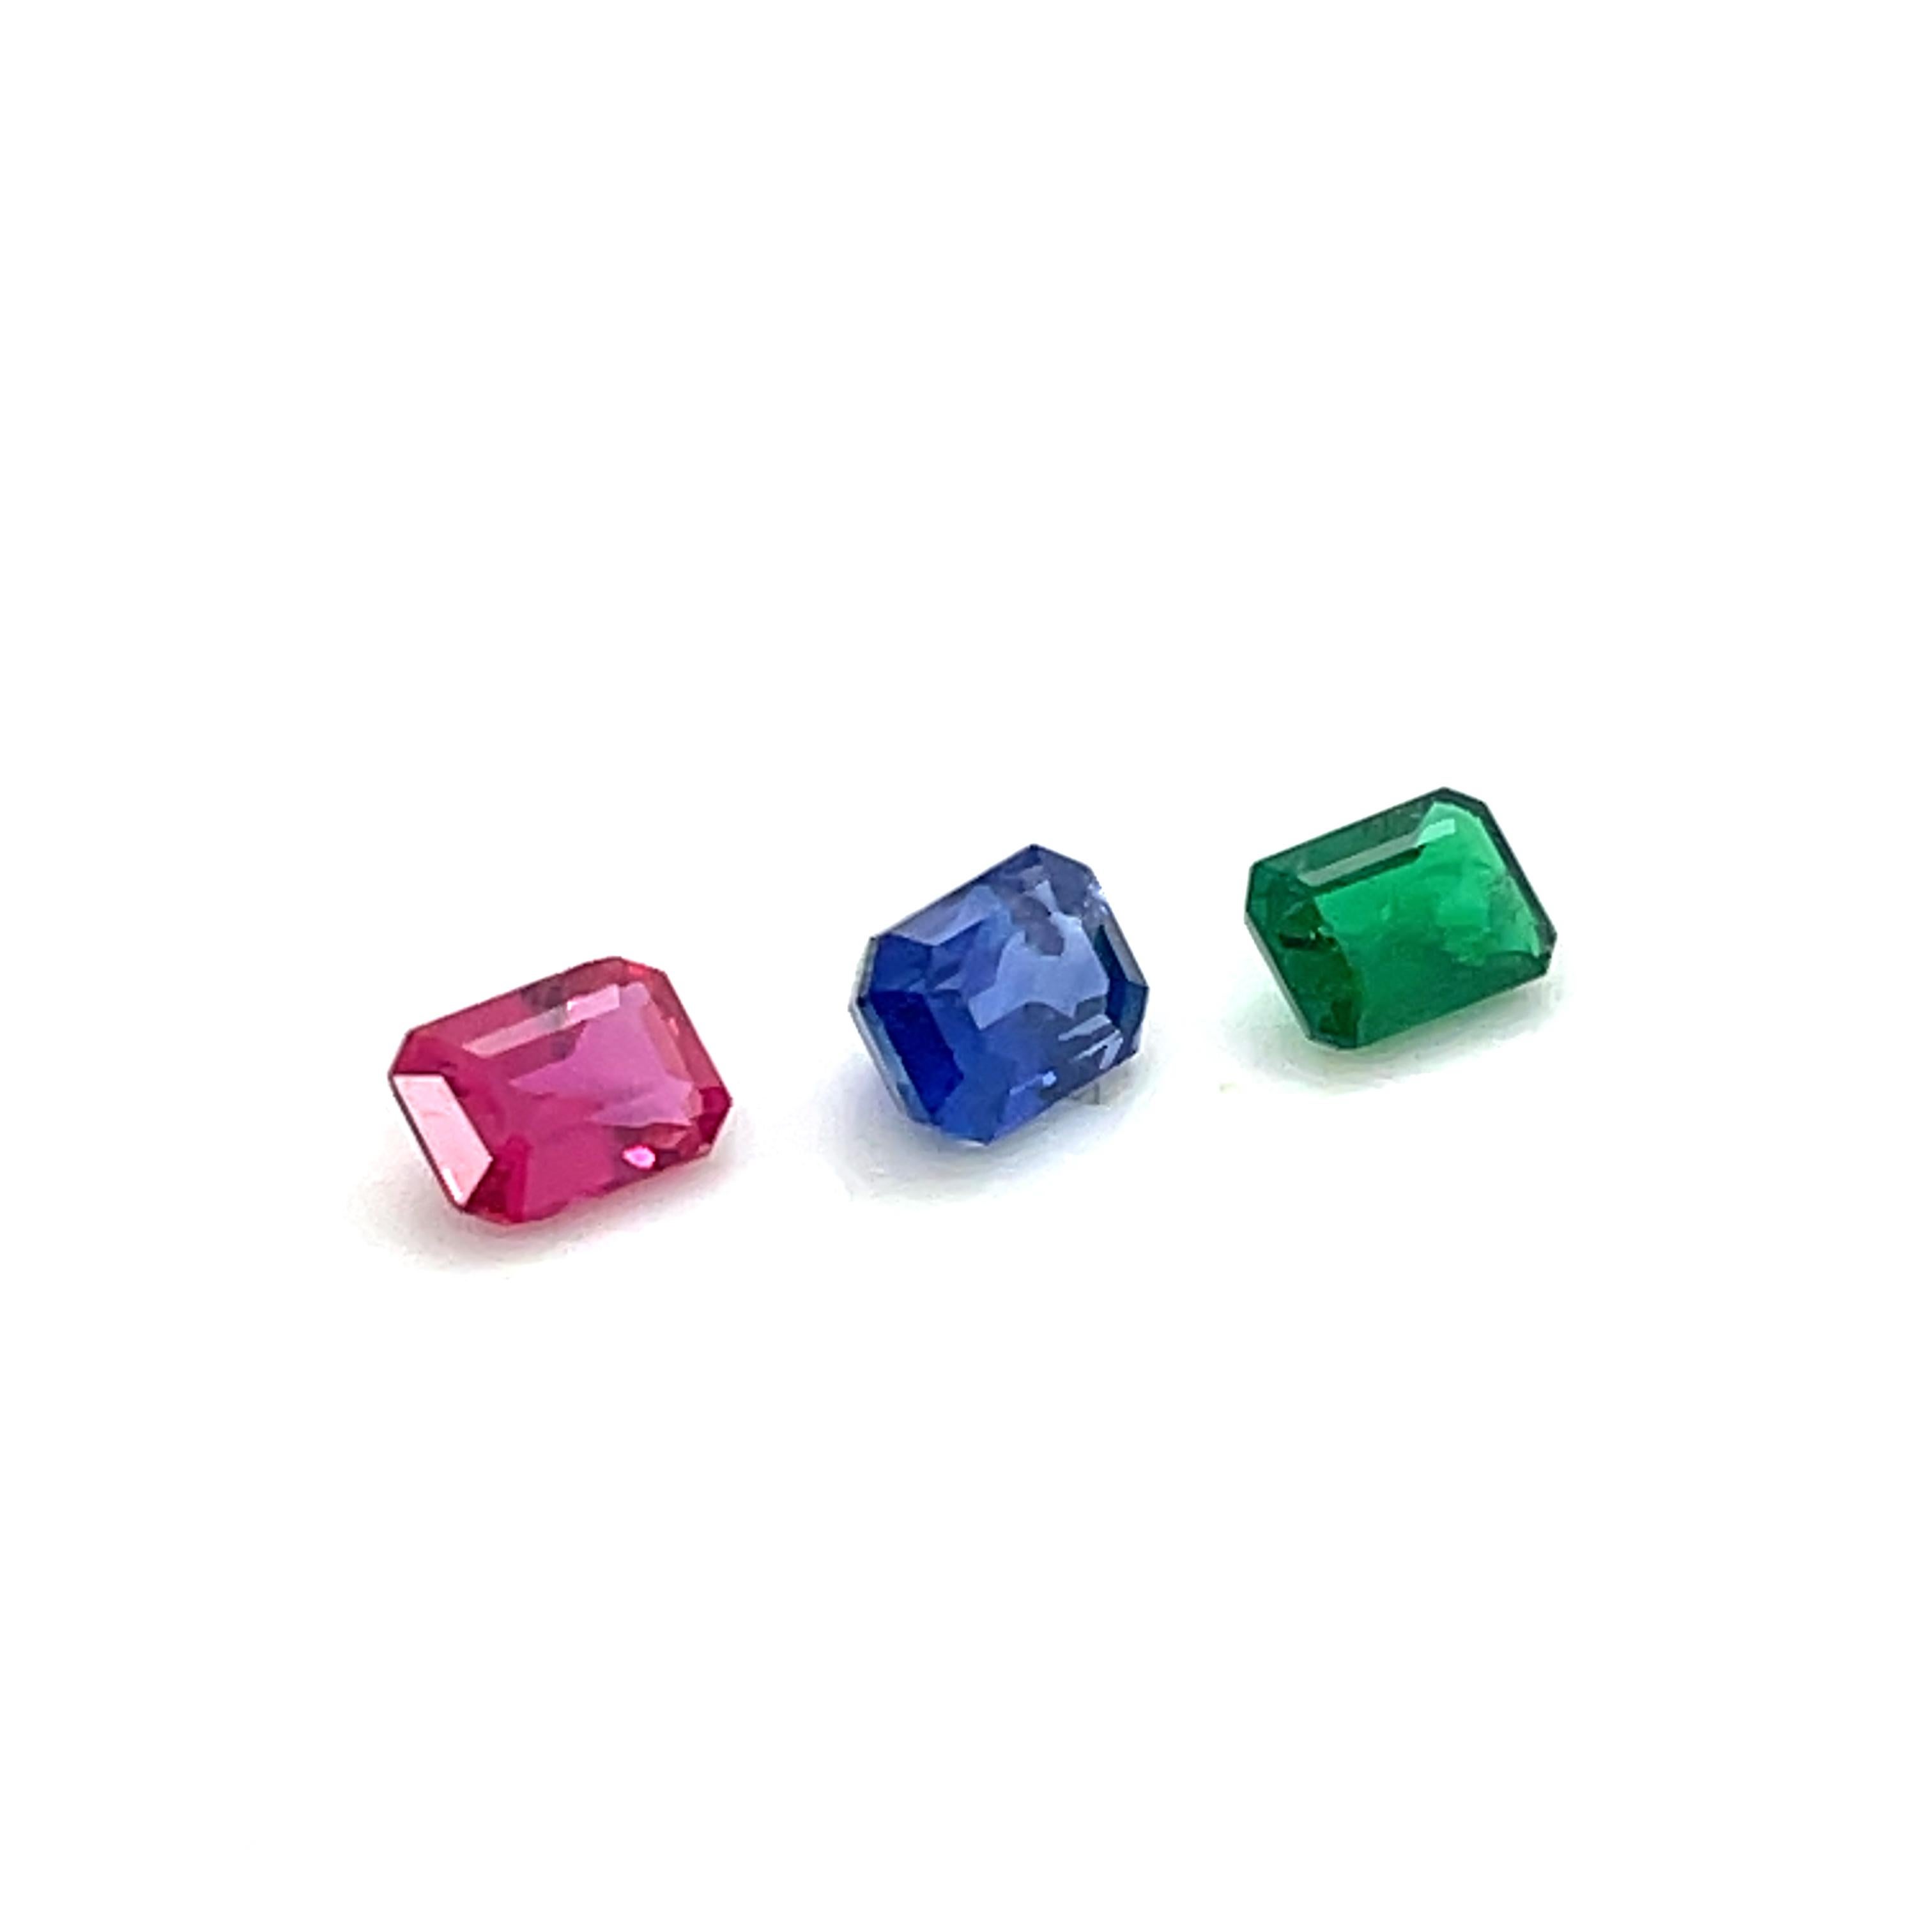 Contemporary Emerald-Cut Ruby Cts 1.31 and Blue Sapphire Cts 2.16 and Emerald Cts 0.92 Loose  For Sale